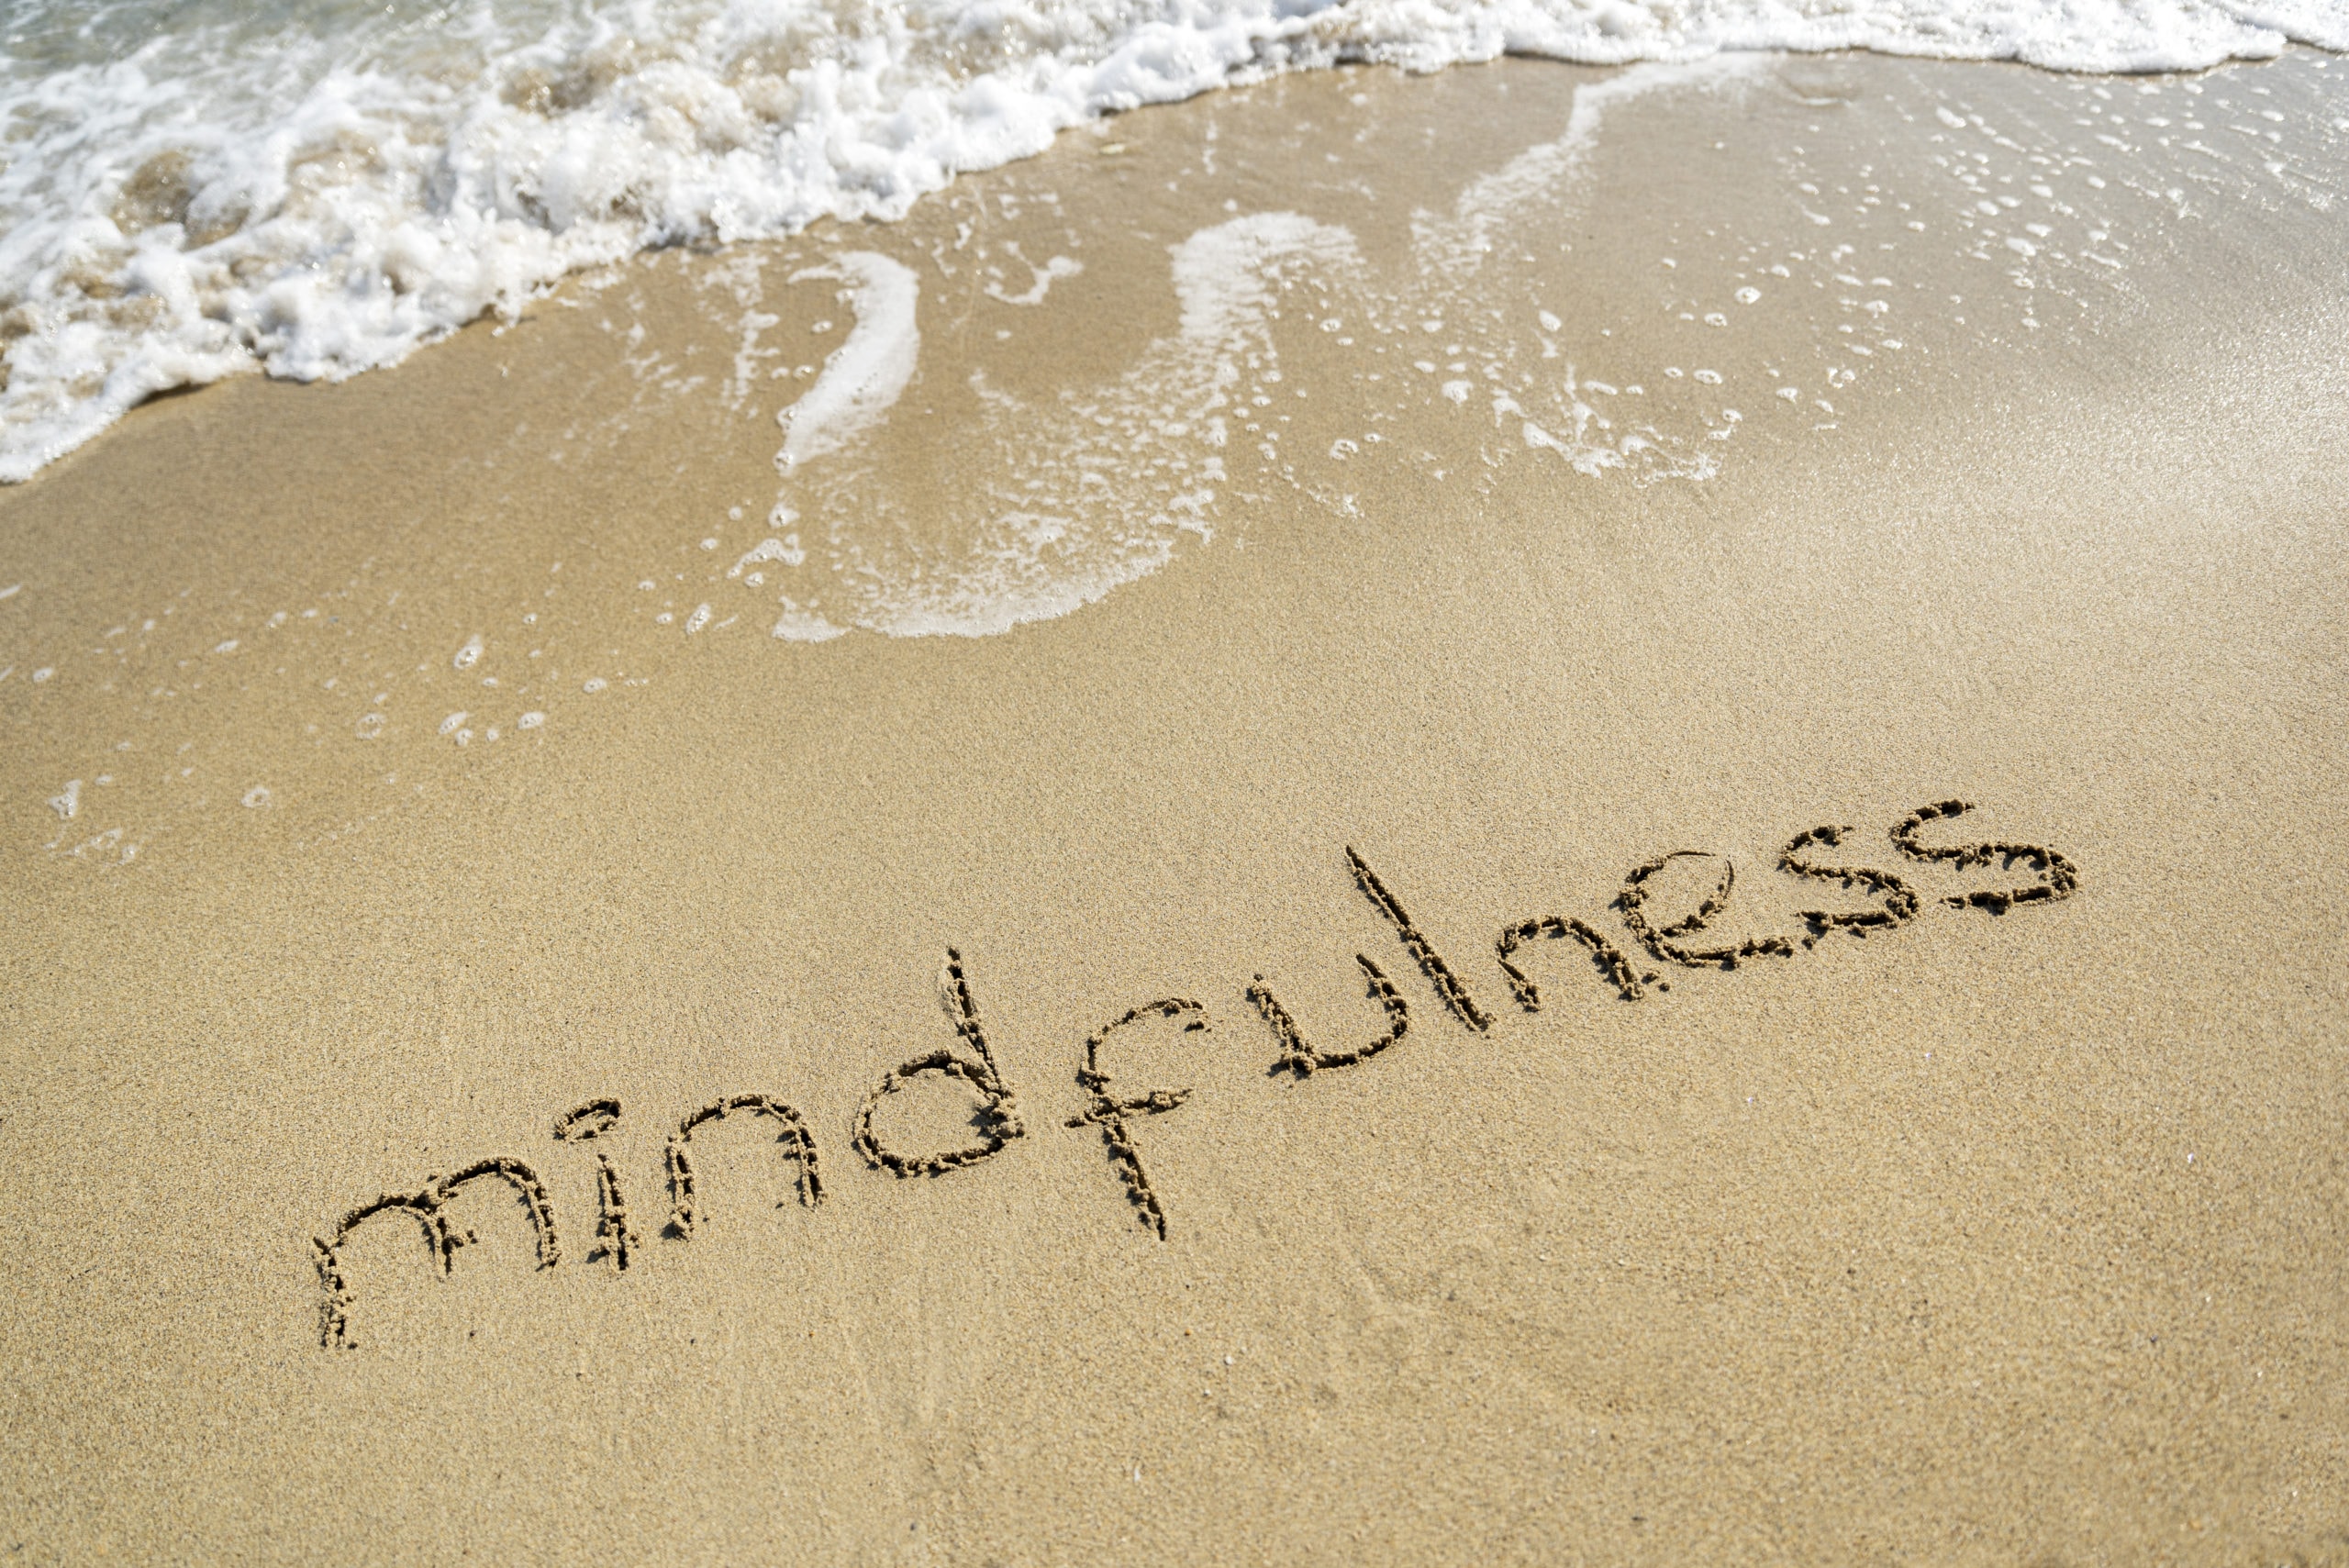 Stressed? We can help. UAMS is offering the Mindfulness-Based Stress Reduction (MBSR) Program online starting Sept. 28.